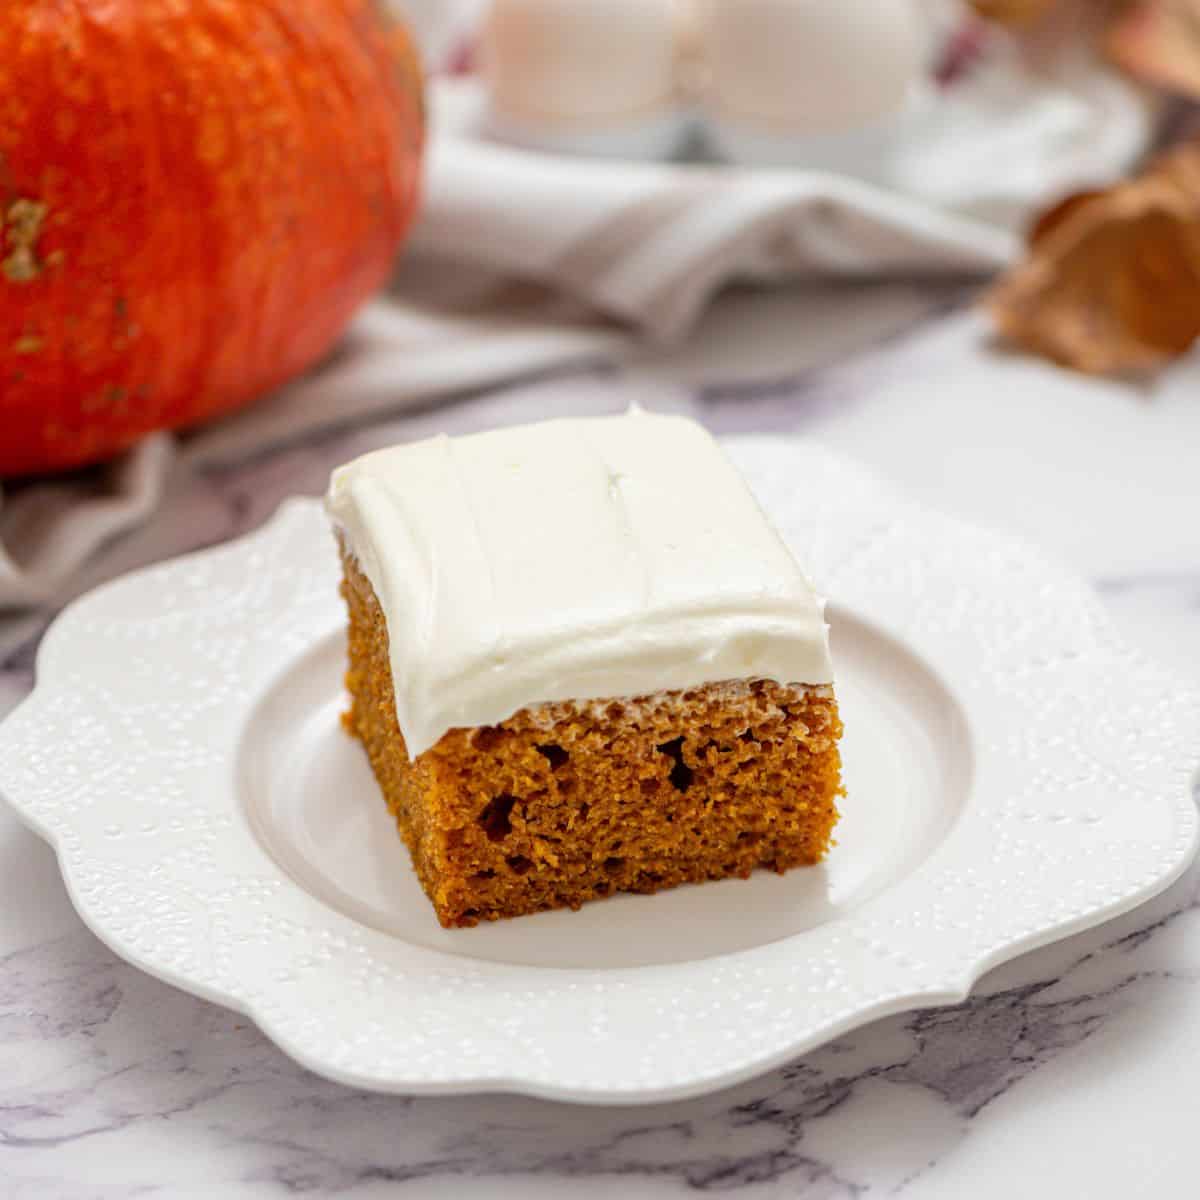 Slice of pumpkin cake with cream cheese frosing on white plate.